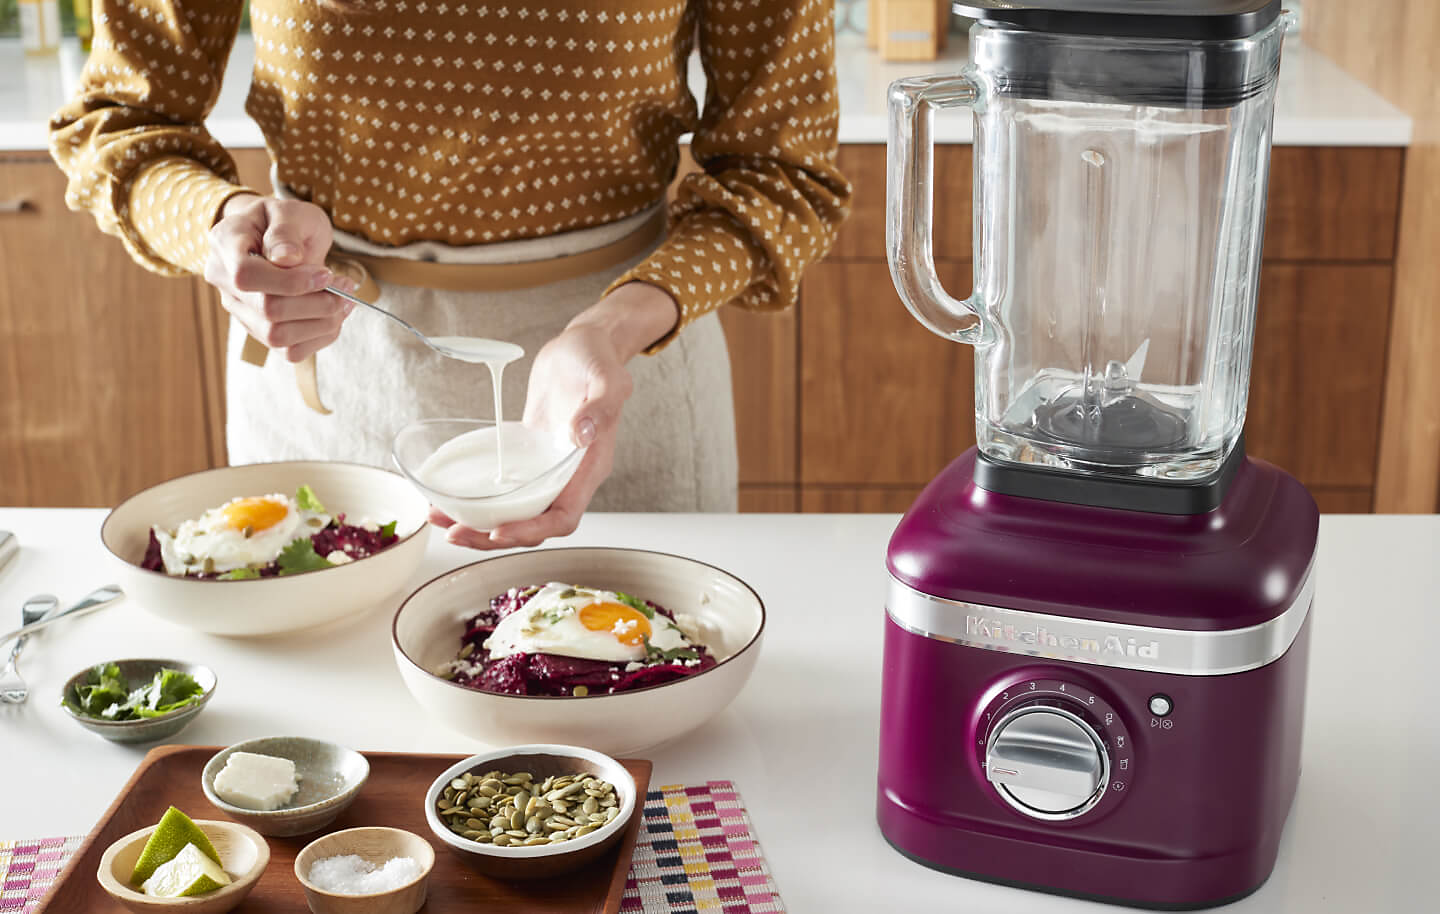 https://kitchenaid-h.assetsadobe.com/is/image/content/dam/business-unit/kitchenaid/en-us/marketing-content/site-assets/page-content/pinch-of-help/how-to-shred-chicken-in-a-stand-mixer-opti/shred-chicken-img3.jpg?fmt=png-alpha&qlt=85,0&resMode=sharp2&op_usm=1.75,0.3,2,0&scl=1&constrain=fit,1